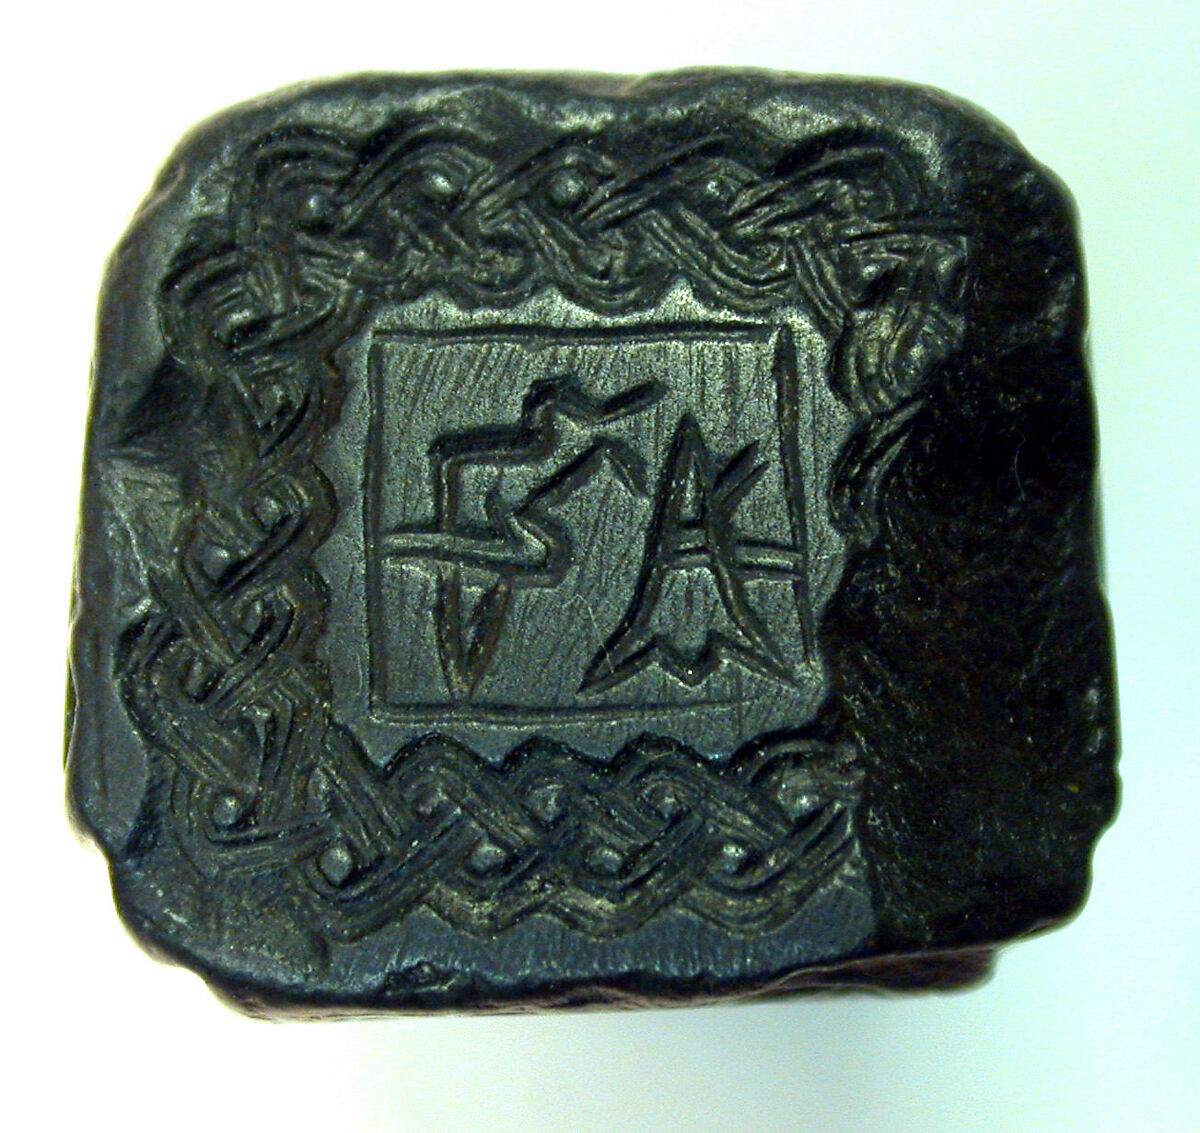 Square shaped stamp seal with loop handles, Hematite 